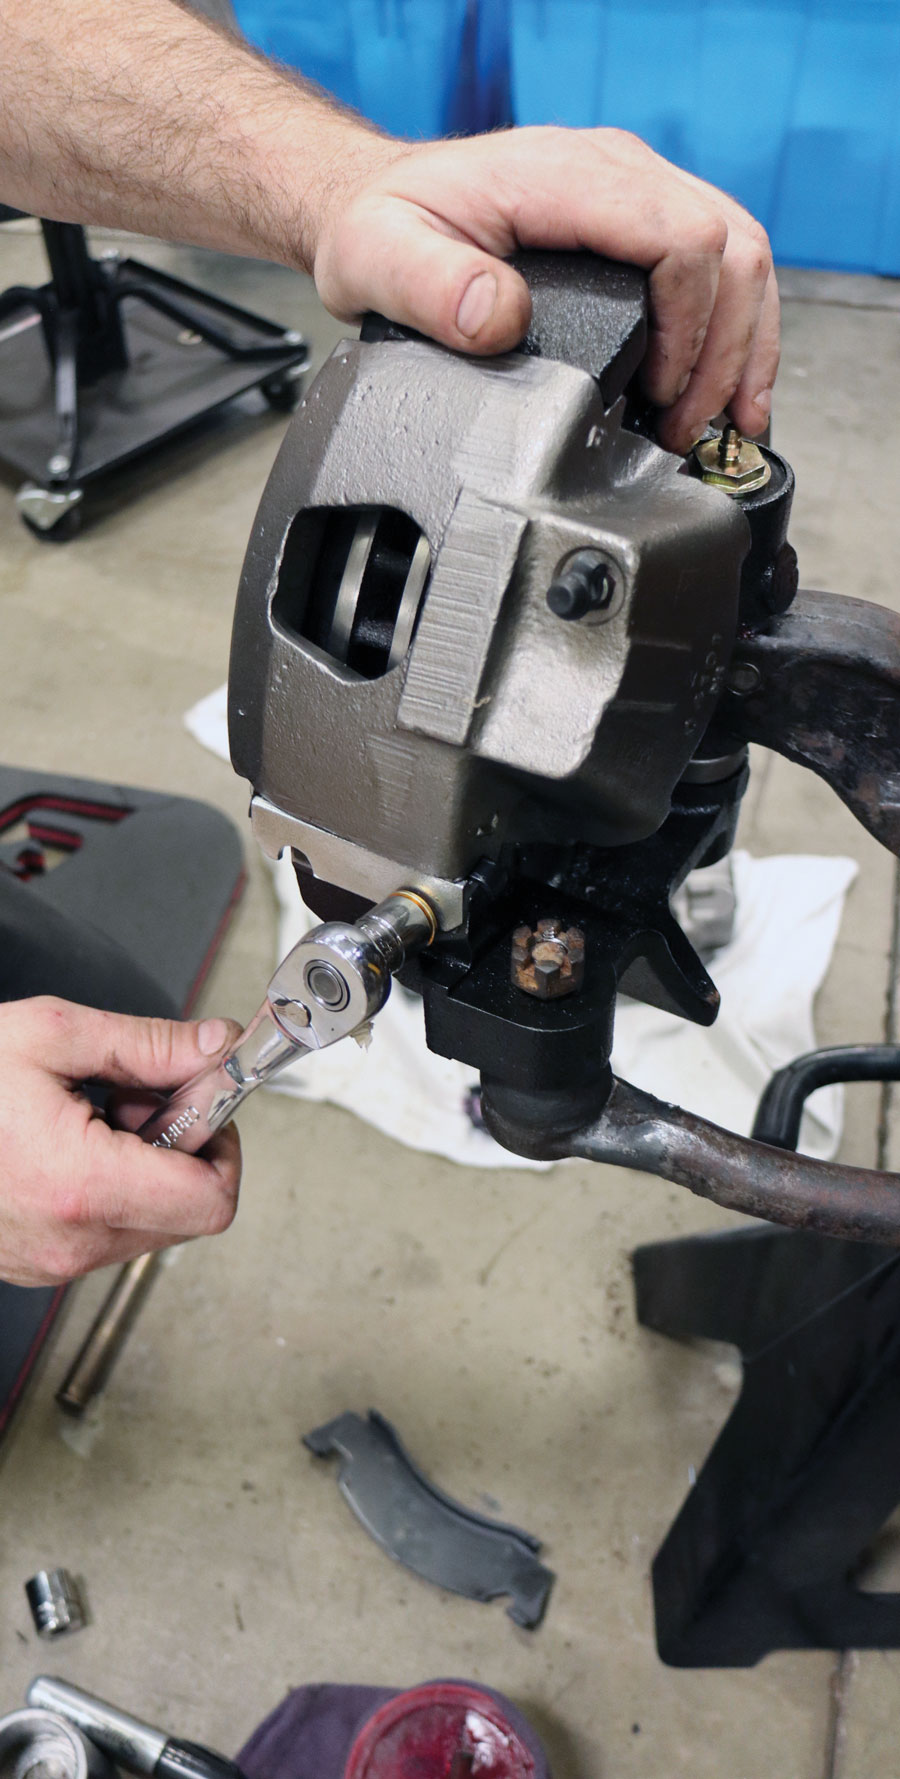 When tightening the flange-head bolt, keep in mind that it’s tapered below the flange